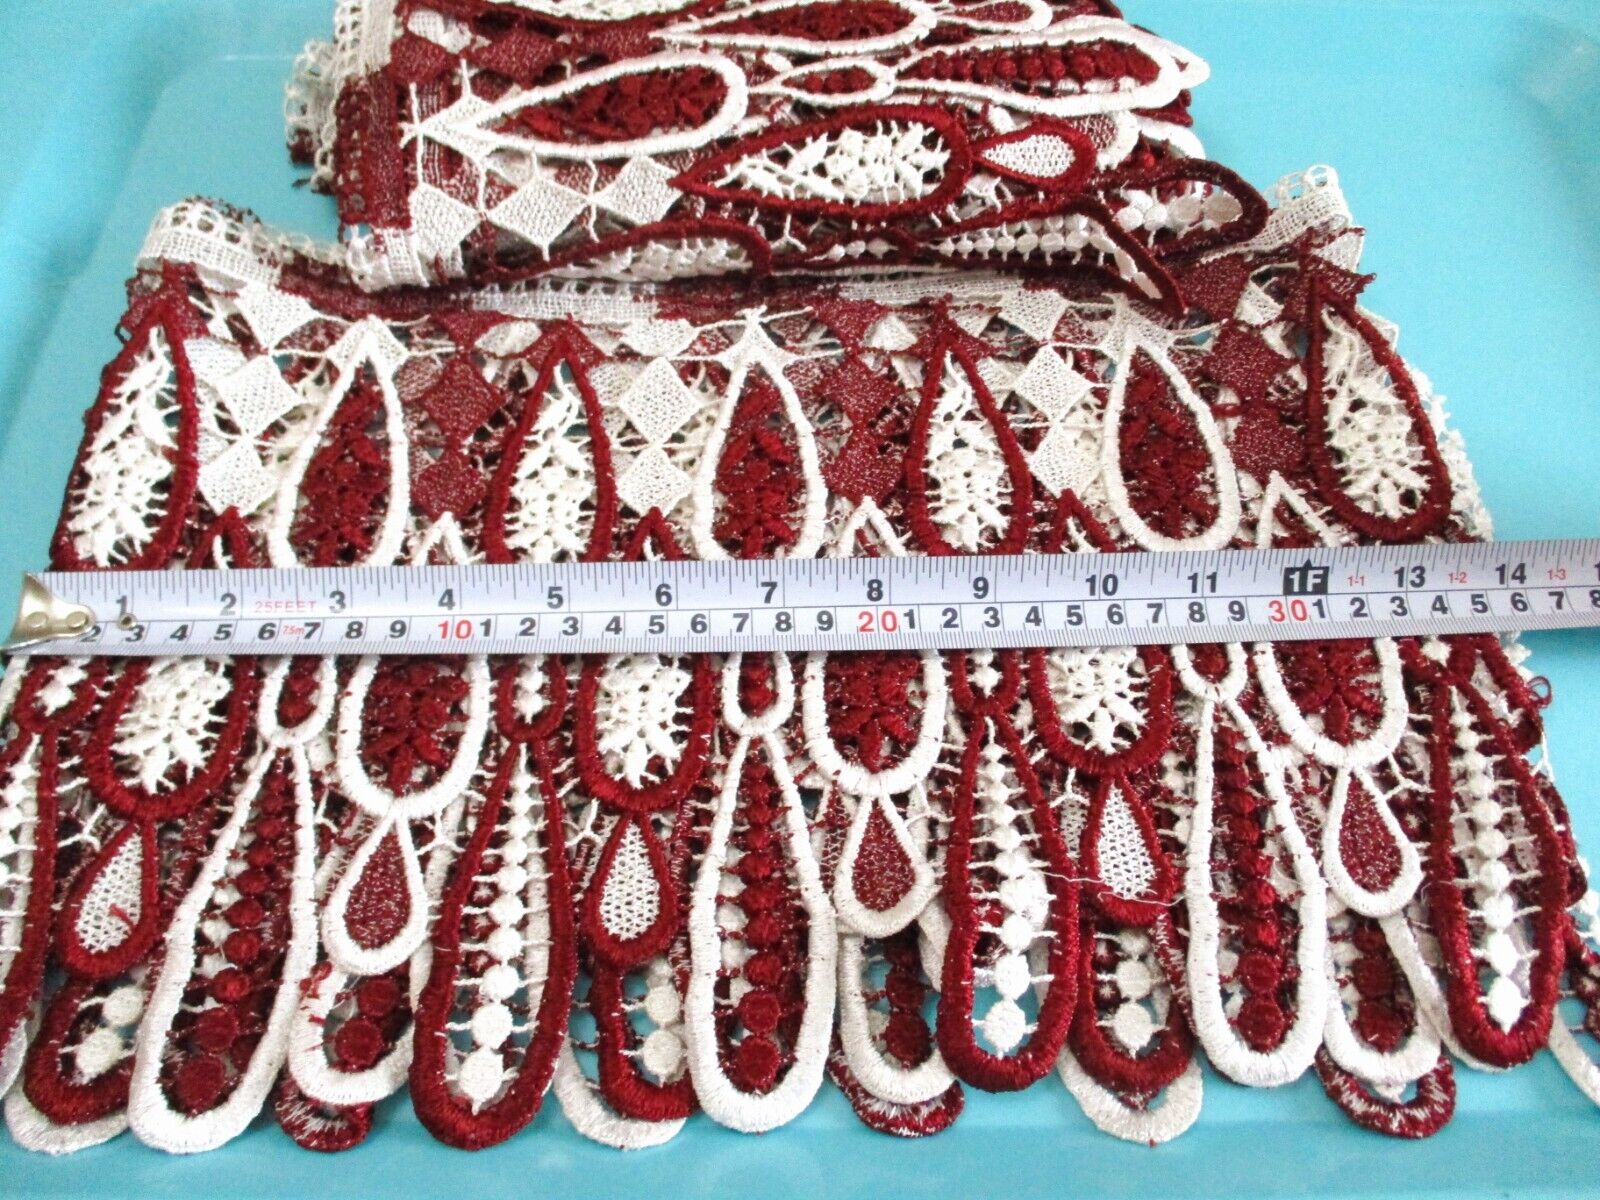 Vintage Scalloped Embroidered Raspberry/Burgundy/White Lace Valance Panels (2)